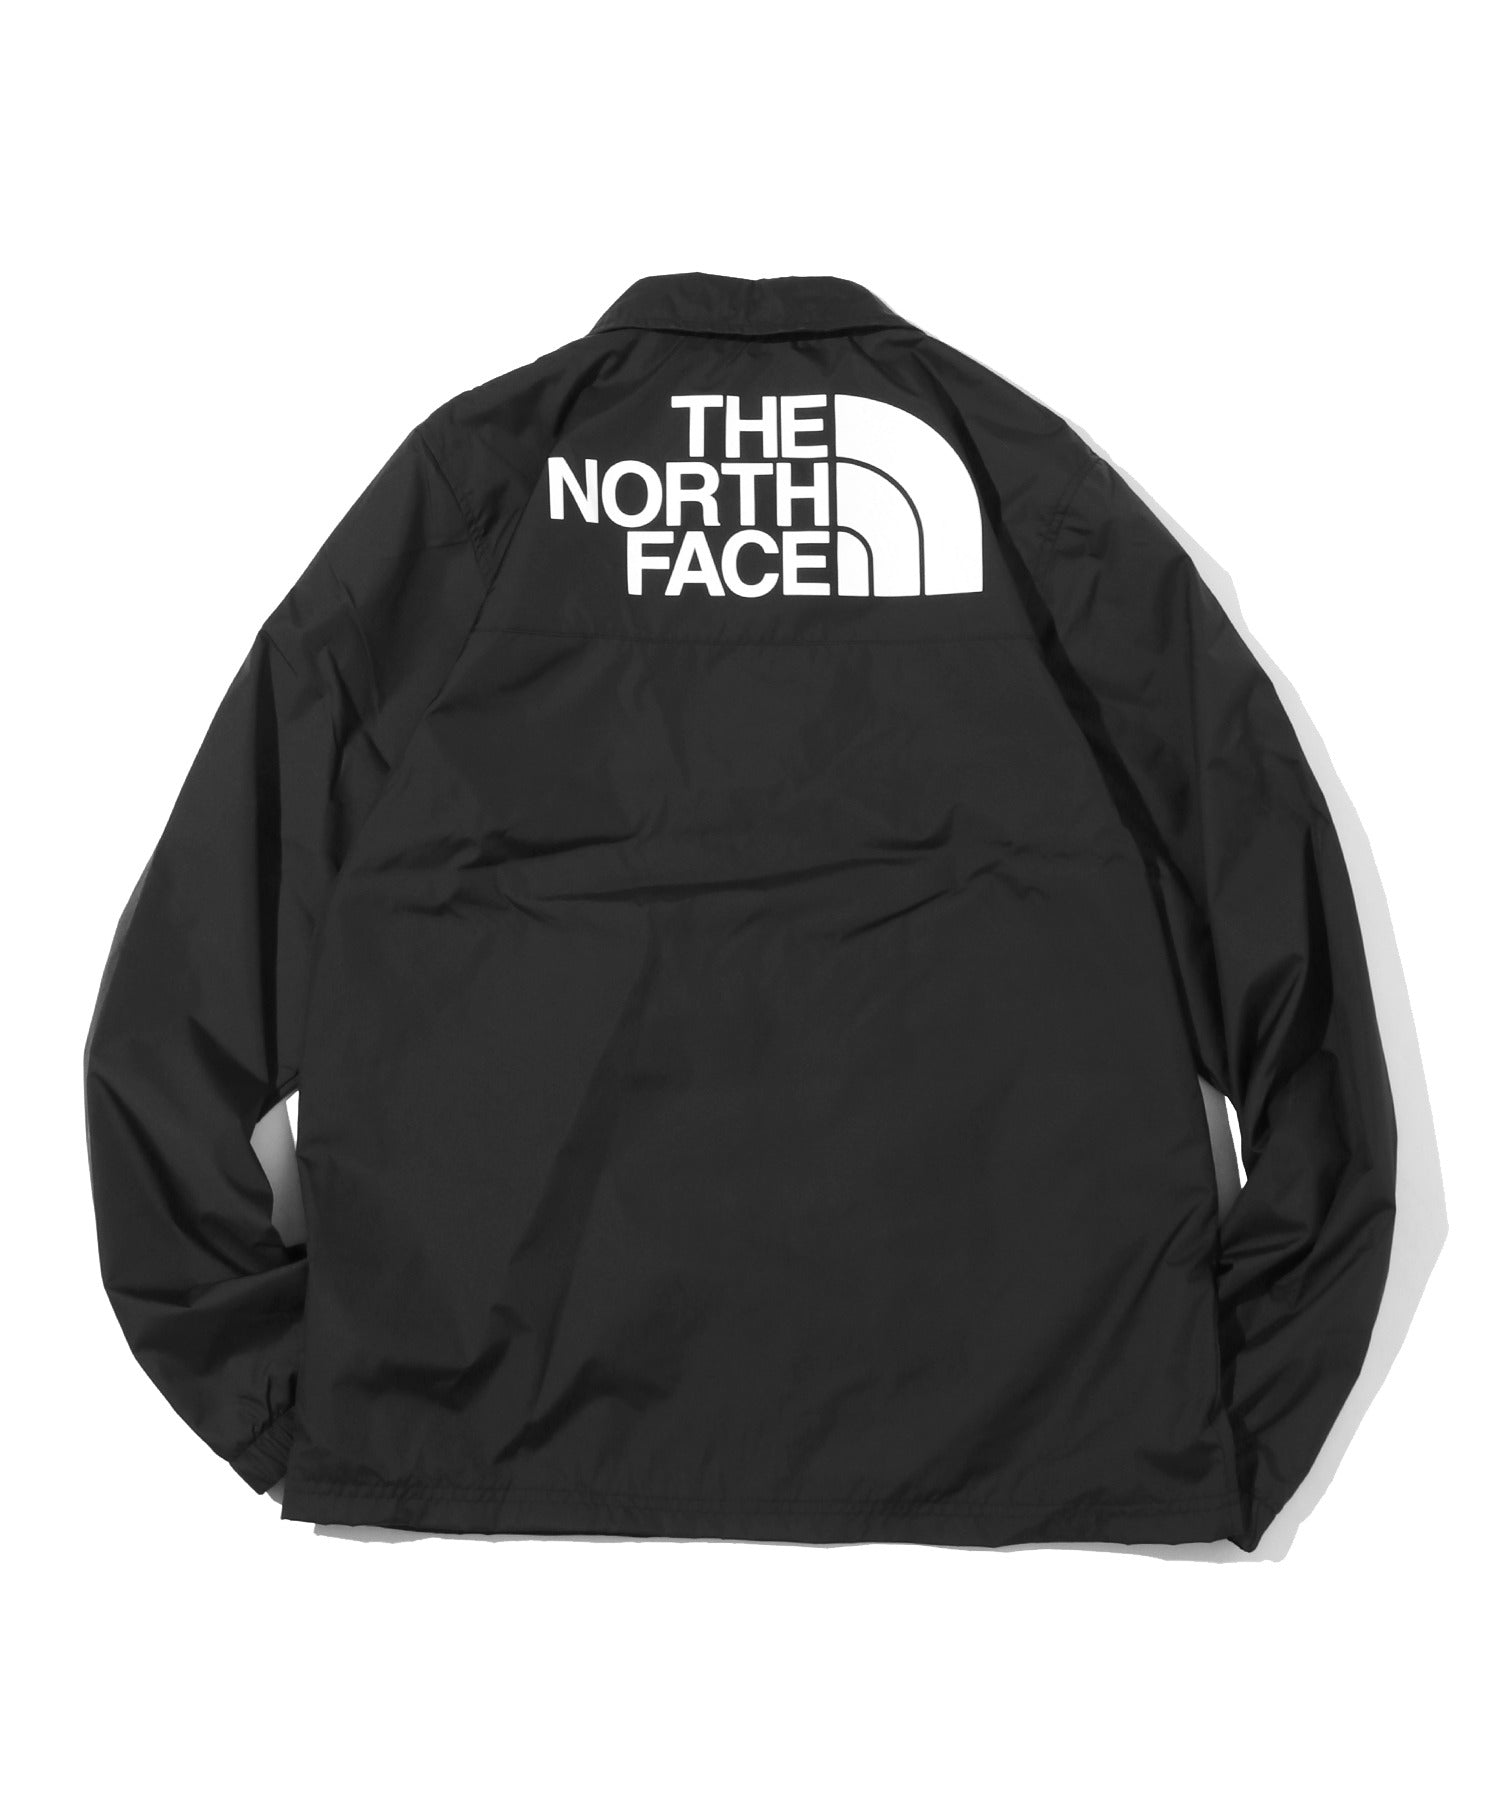 THE NORTH FACE/ザ・ノースフェイス Men's Cyclone Coaches Jacket 